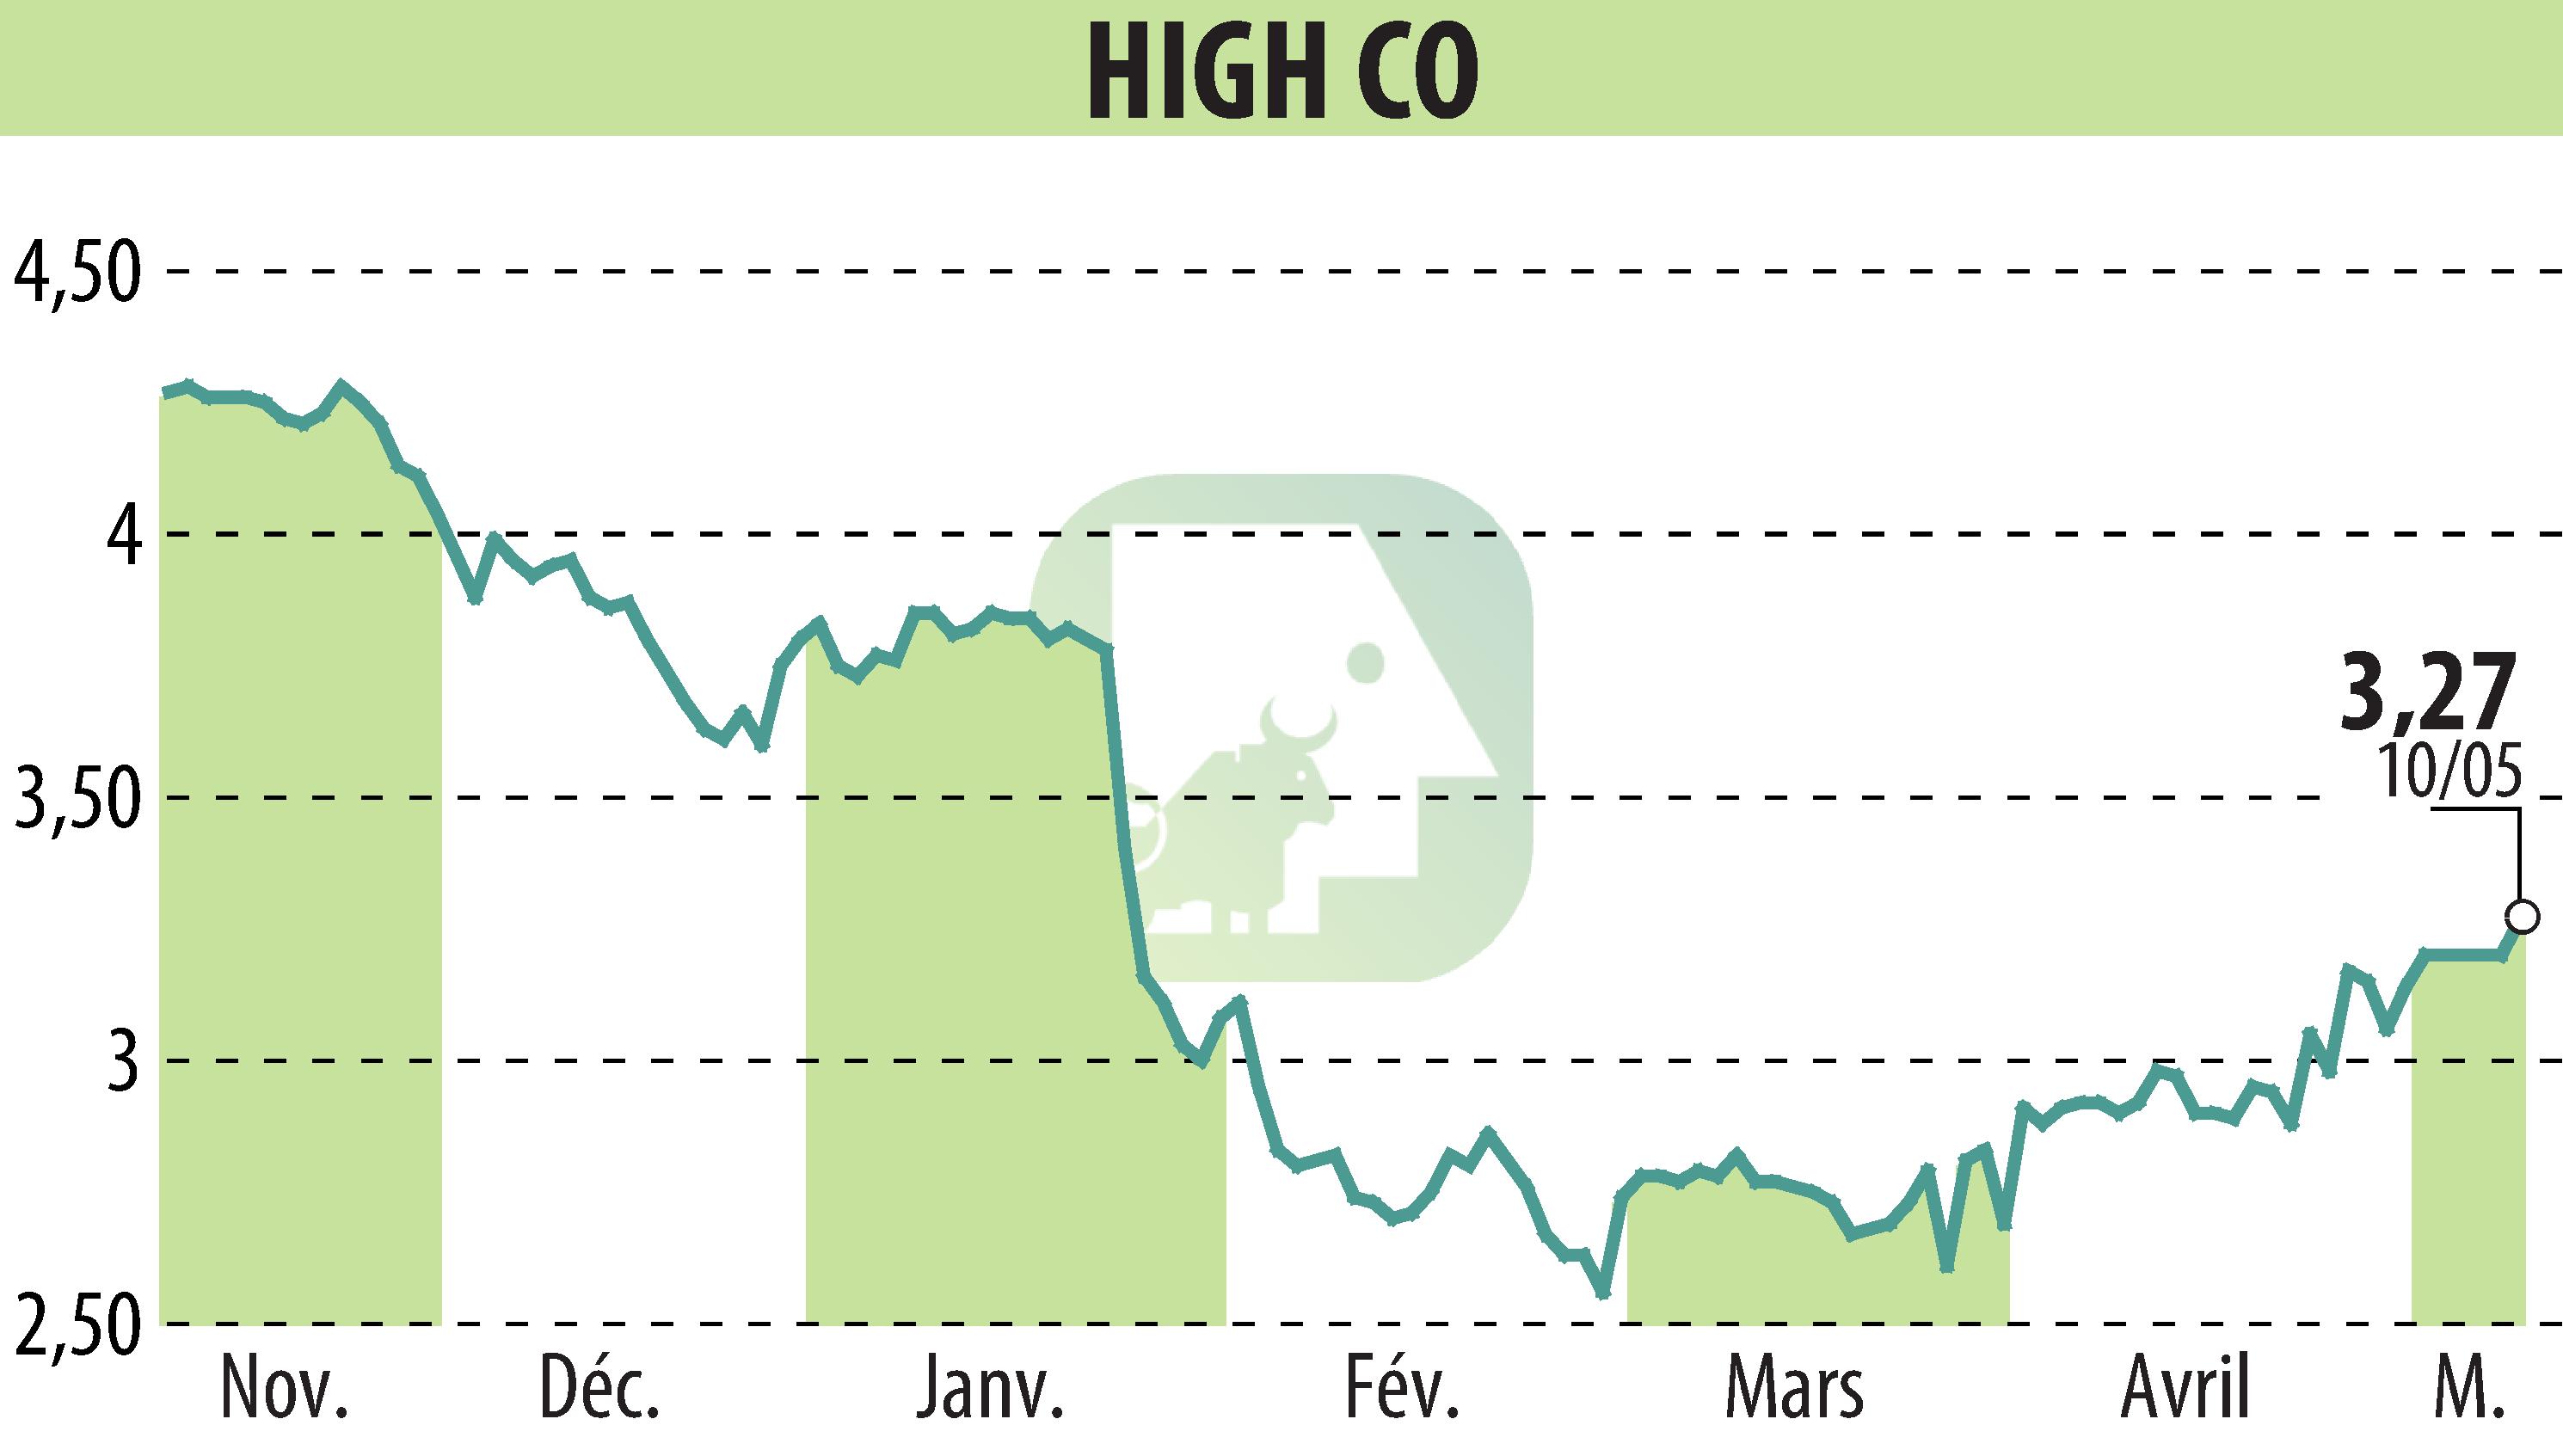 Stock price chart of High Co (EPA:HCO) showing fluctuations.